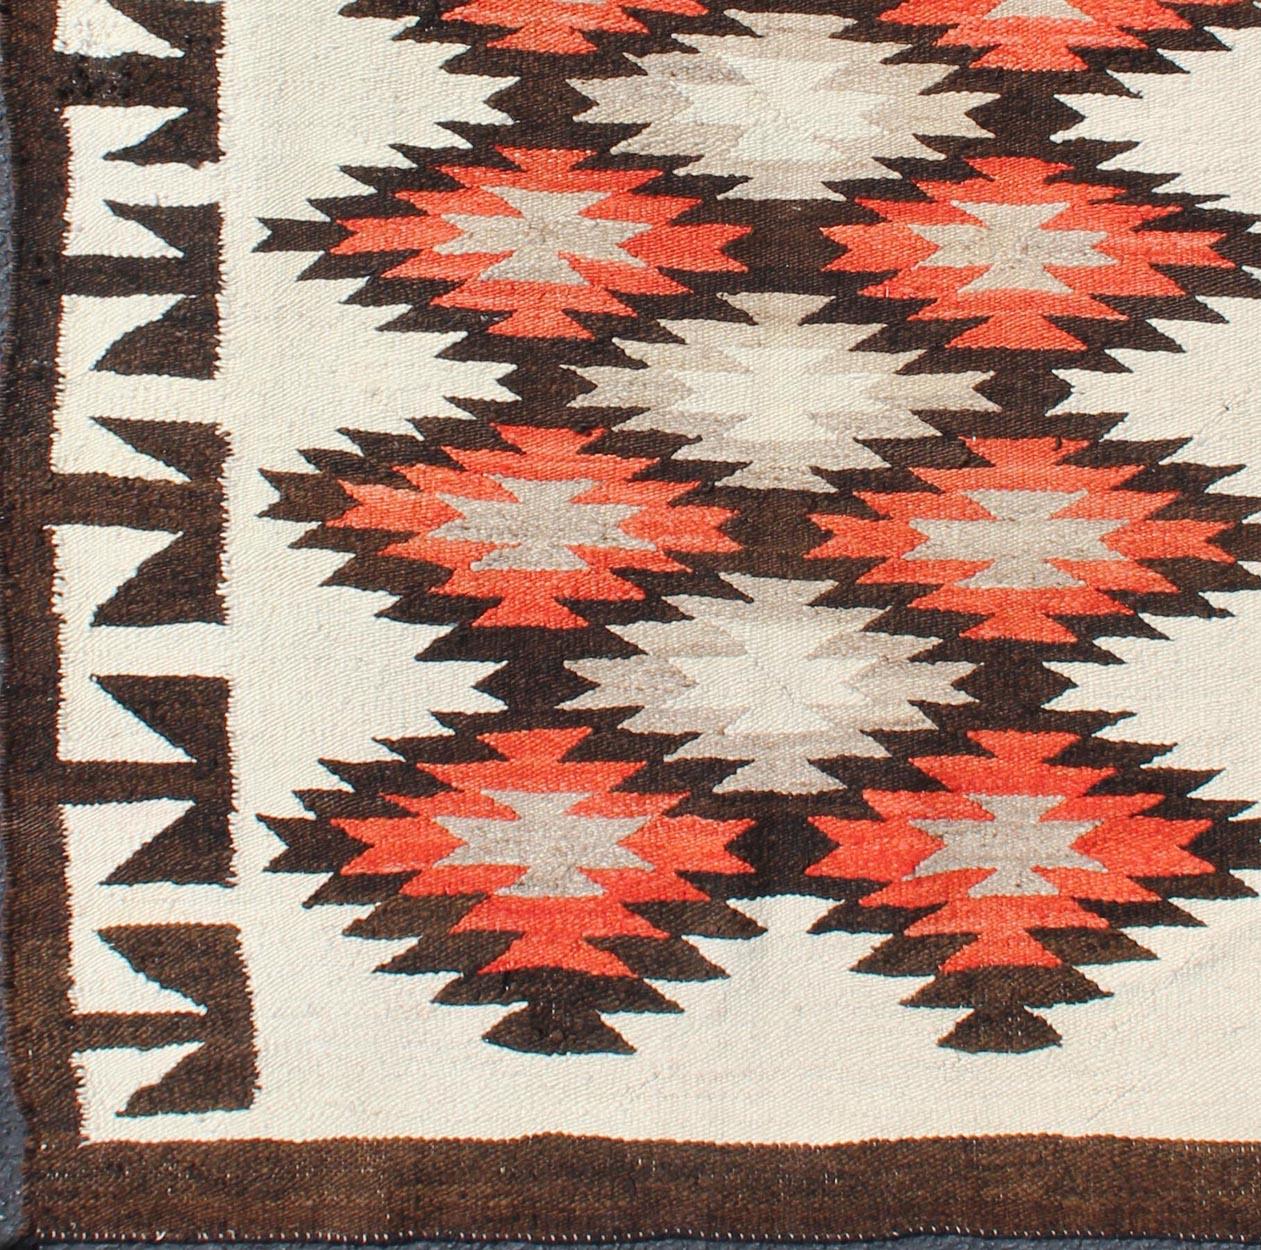 Vintage American Navajo Tribal rug with diamonds in brown, orange and ivory
This intriguing vintage Navajo rug was woven in the United States during the first half of the 20th century. The exciting and unique composition boasts a captivating